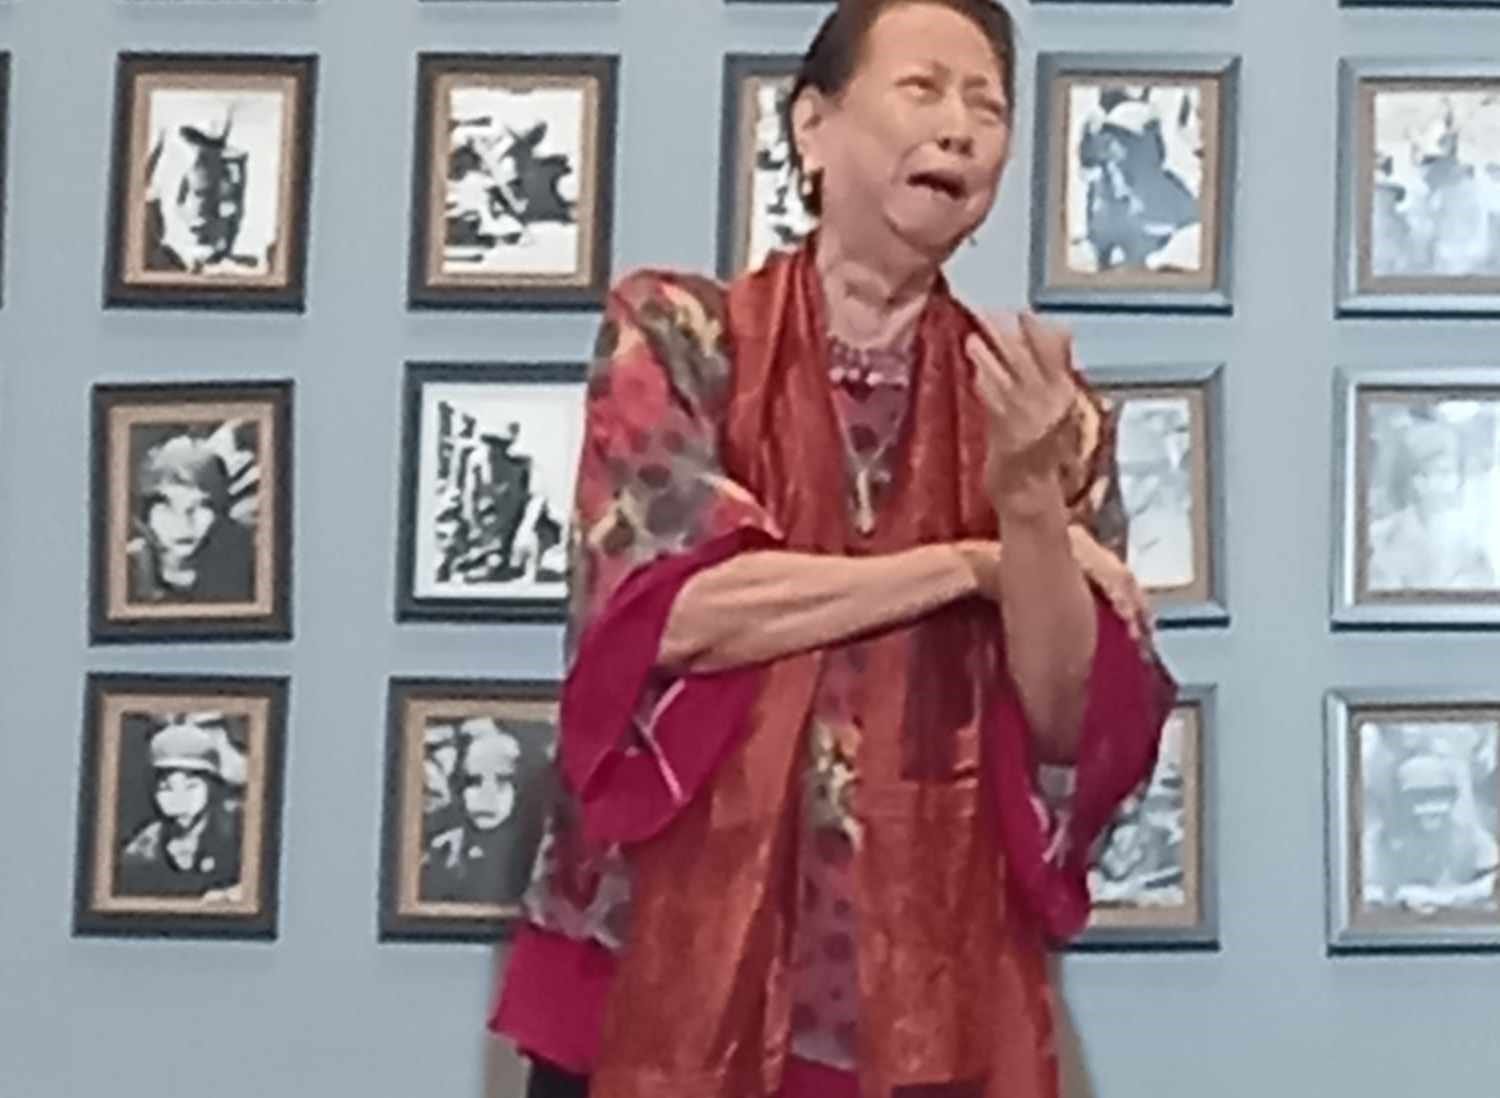 Cecile Guidote-Alvarez, PETA founder, performs a monologue at Clock Tower Museum